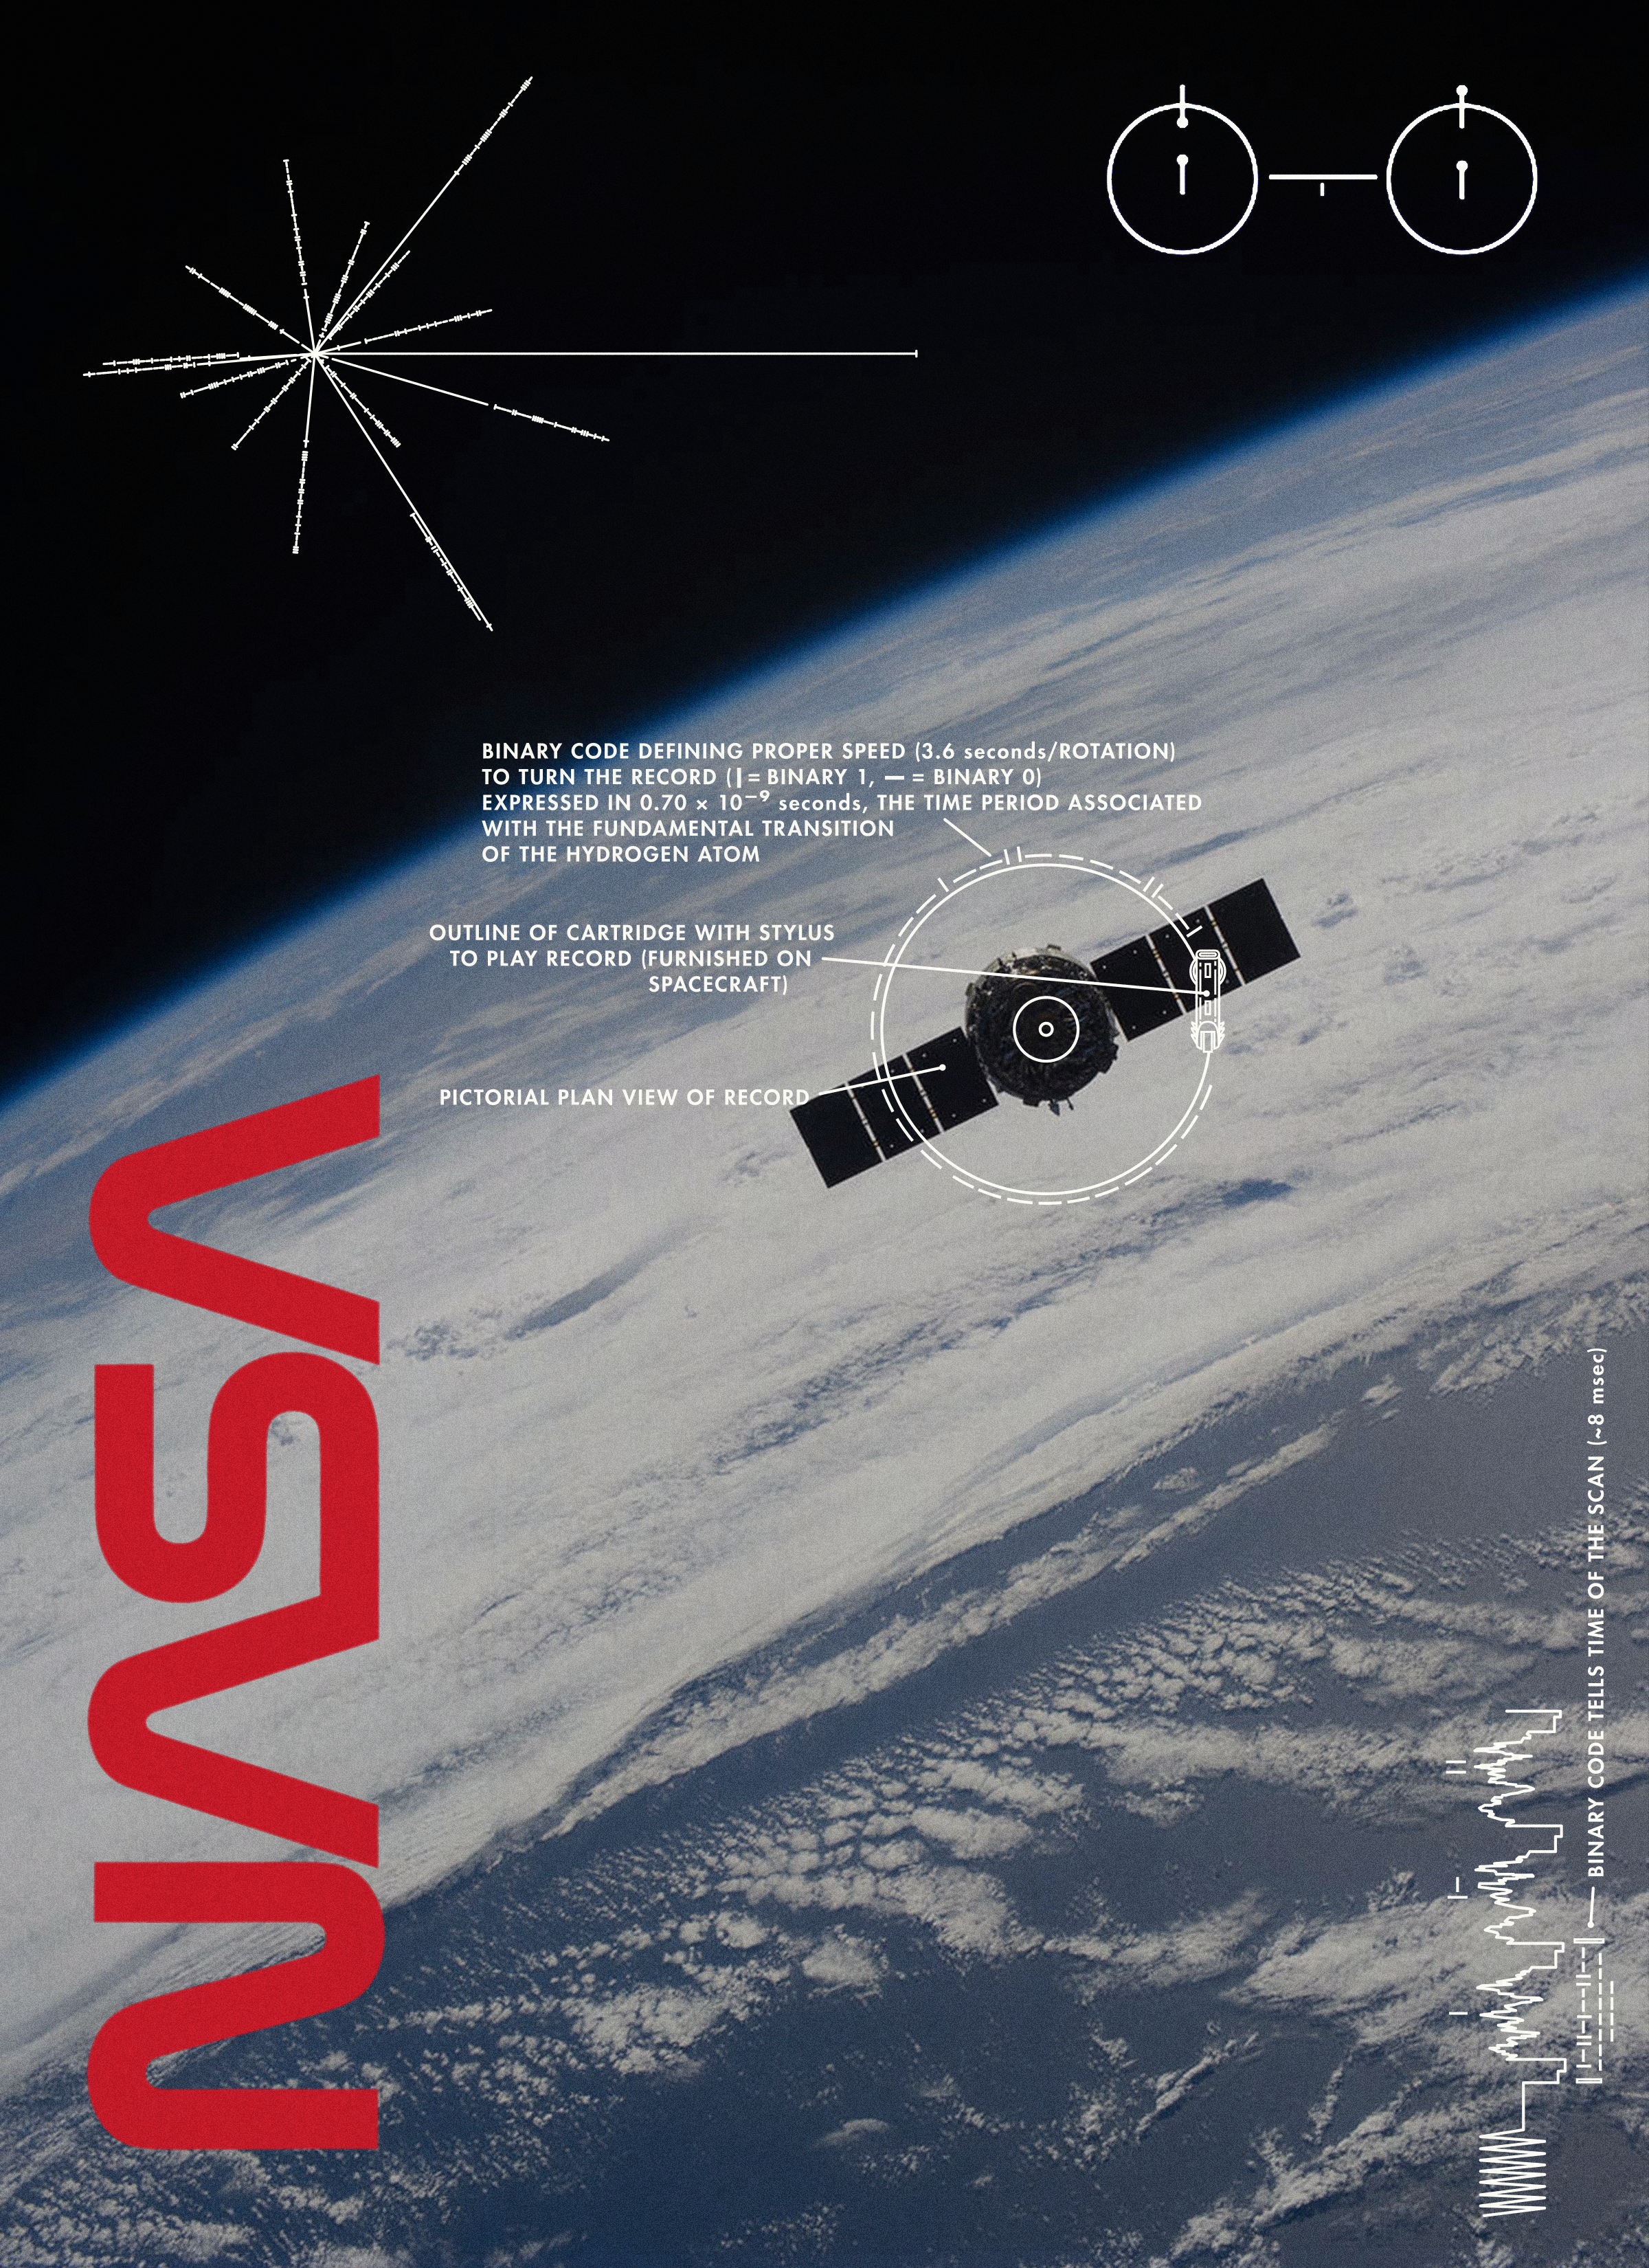 Nasa poster with various graphics overlayed on a photograph of the earth